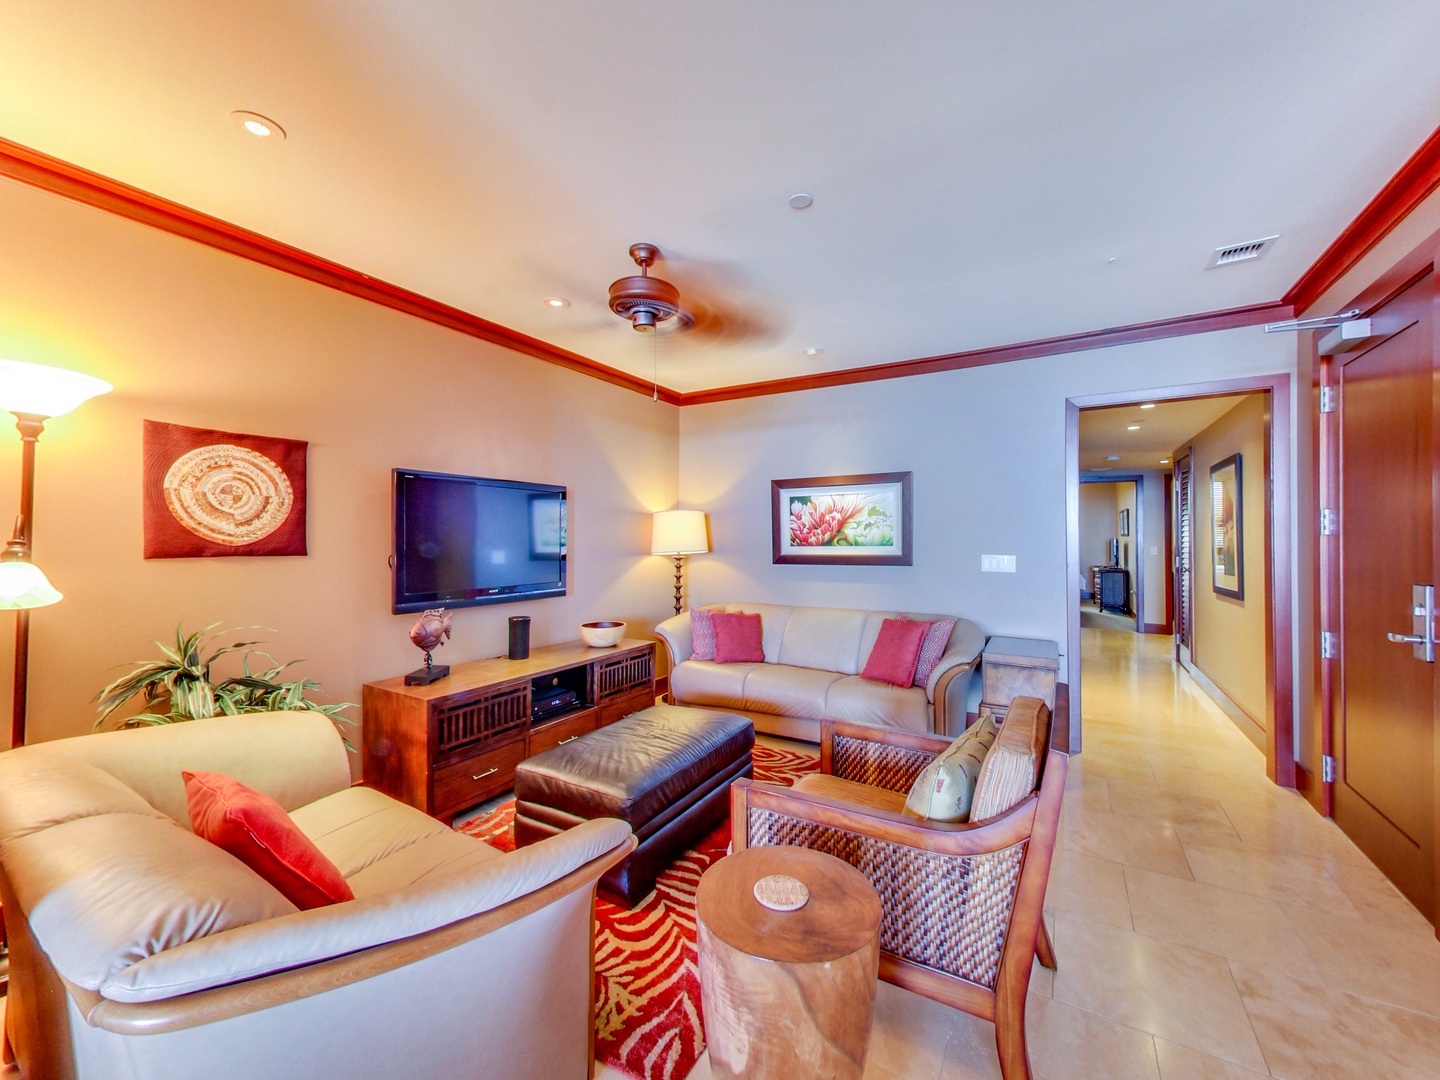 Kapolei Vacation Rentals, Ko Olina Beach Villas O1402 - This tastefully decorated living area with vibrant colors will be your favorite spot.